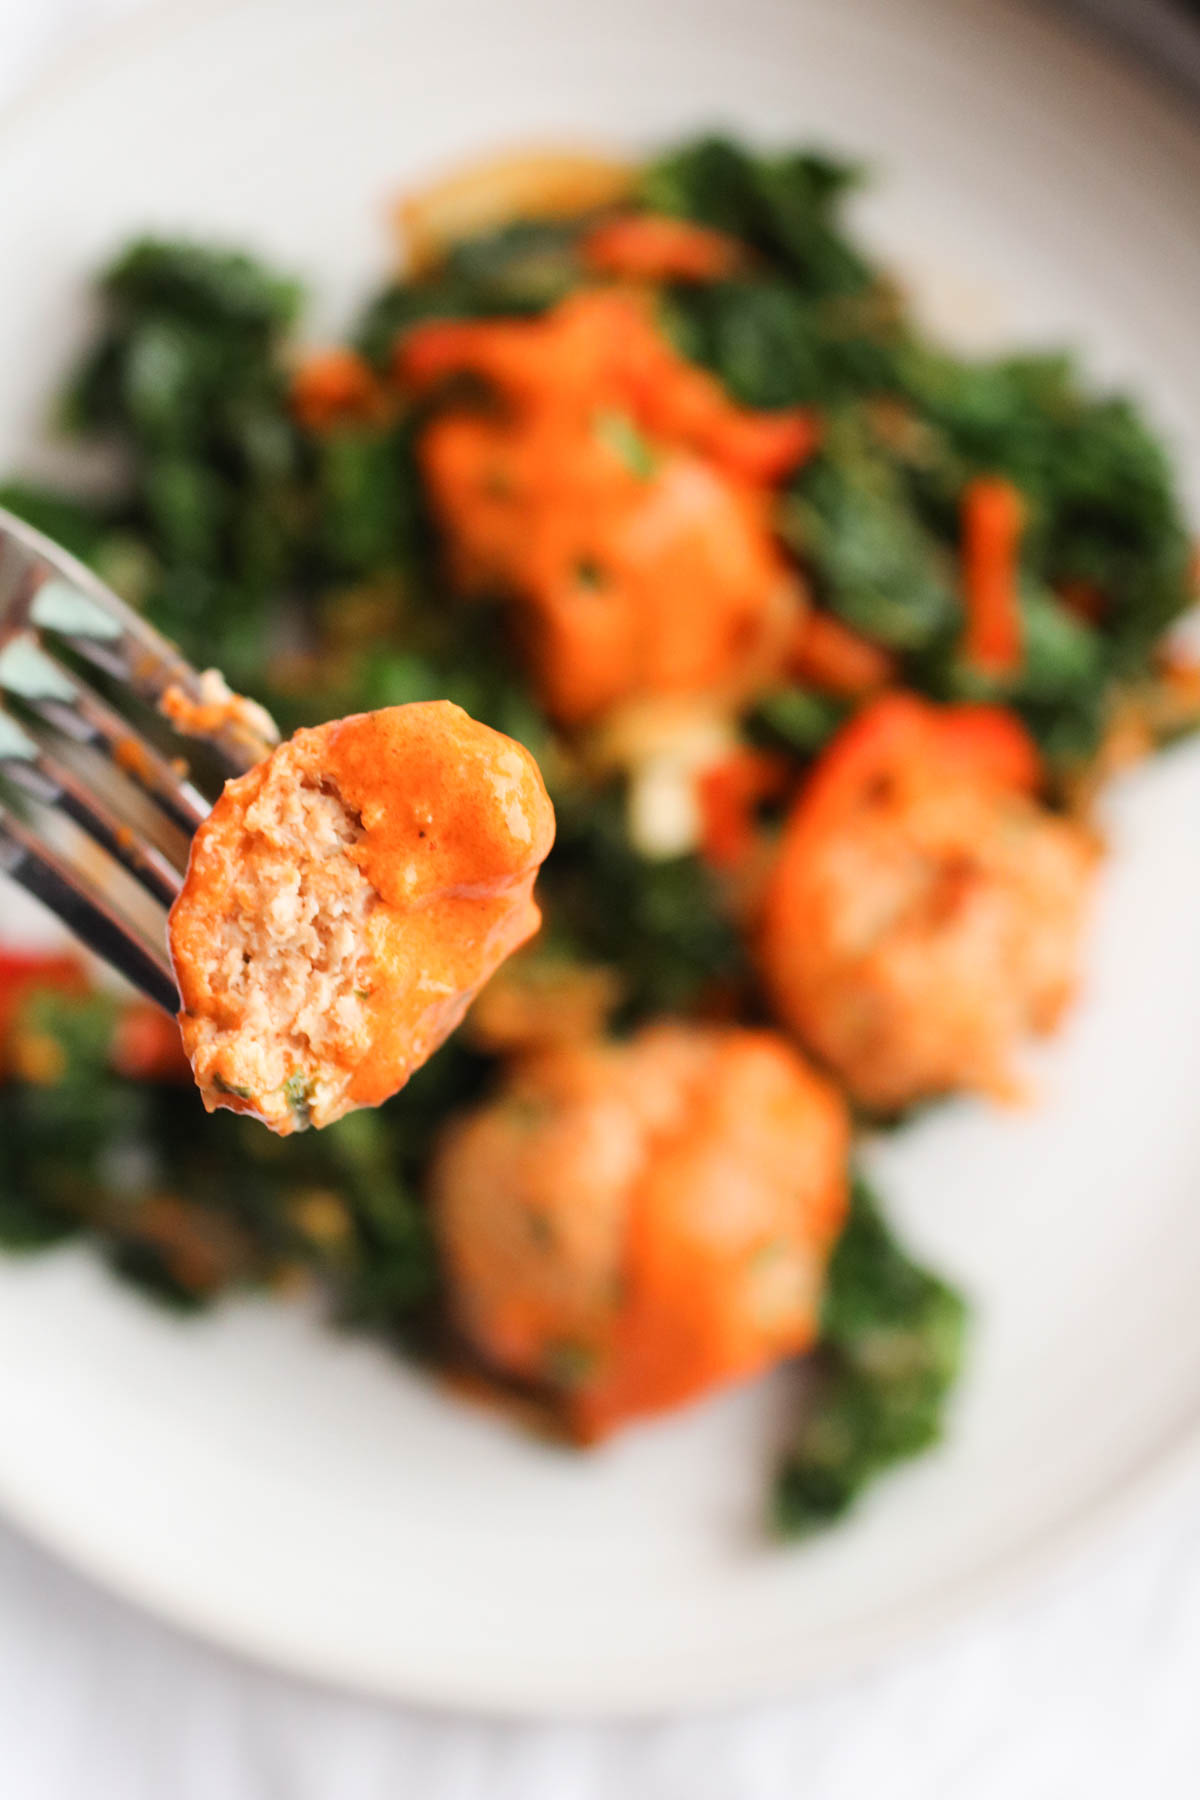 The best chicken meatballs in a creamy roasted red pepper feta cheese sauce with sauteed kale. OMG, so good!